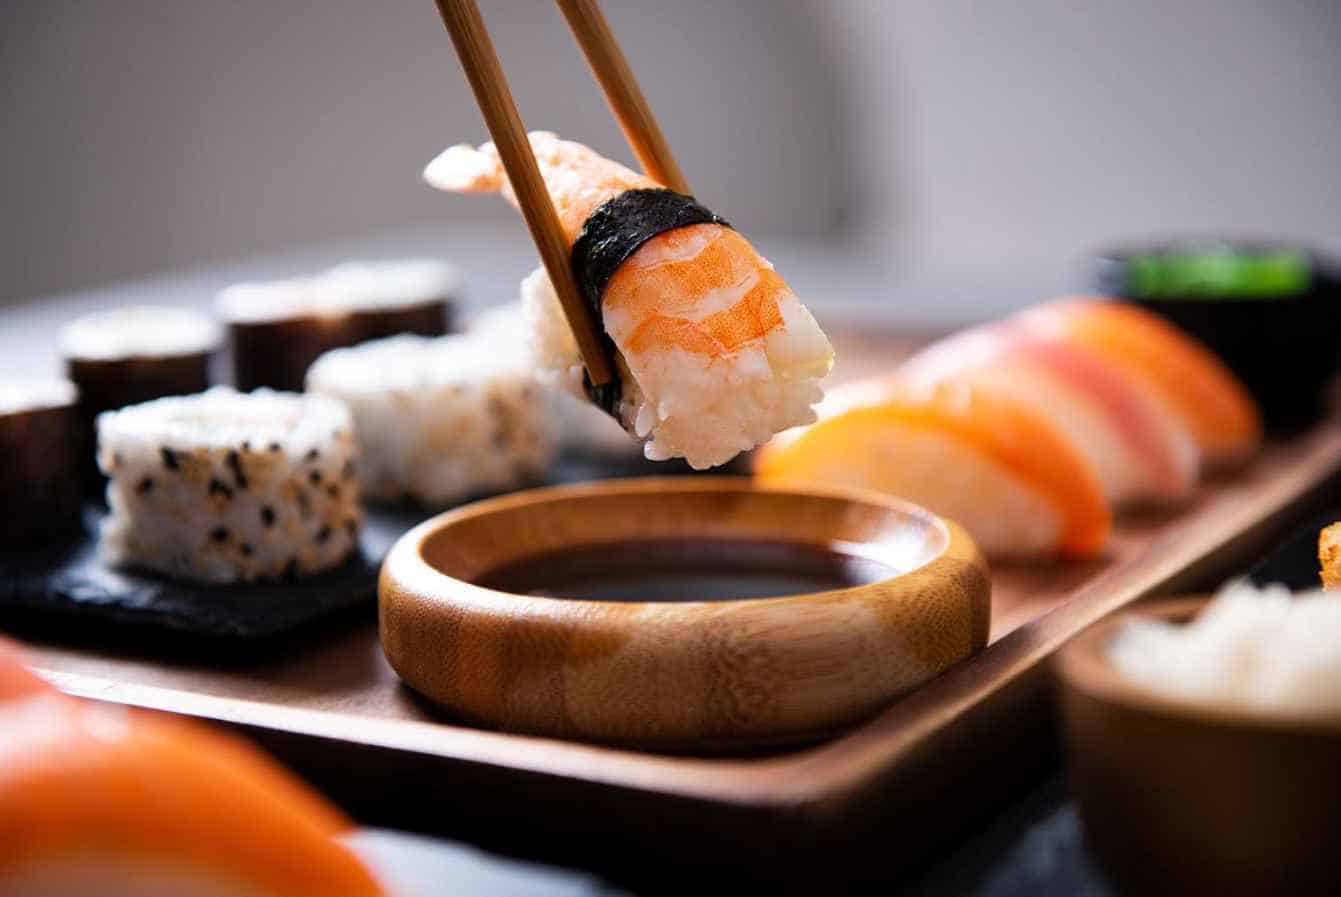 Best Sushi for Health